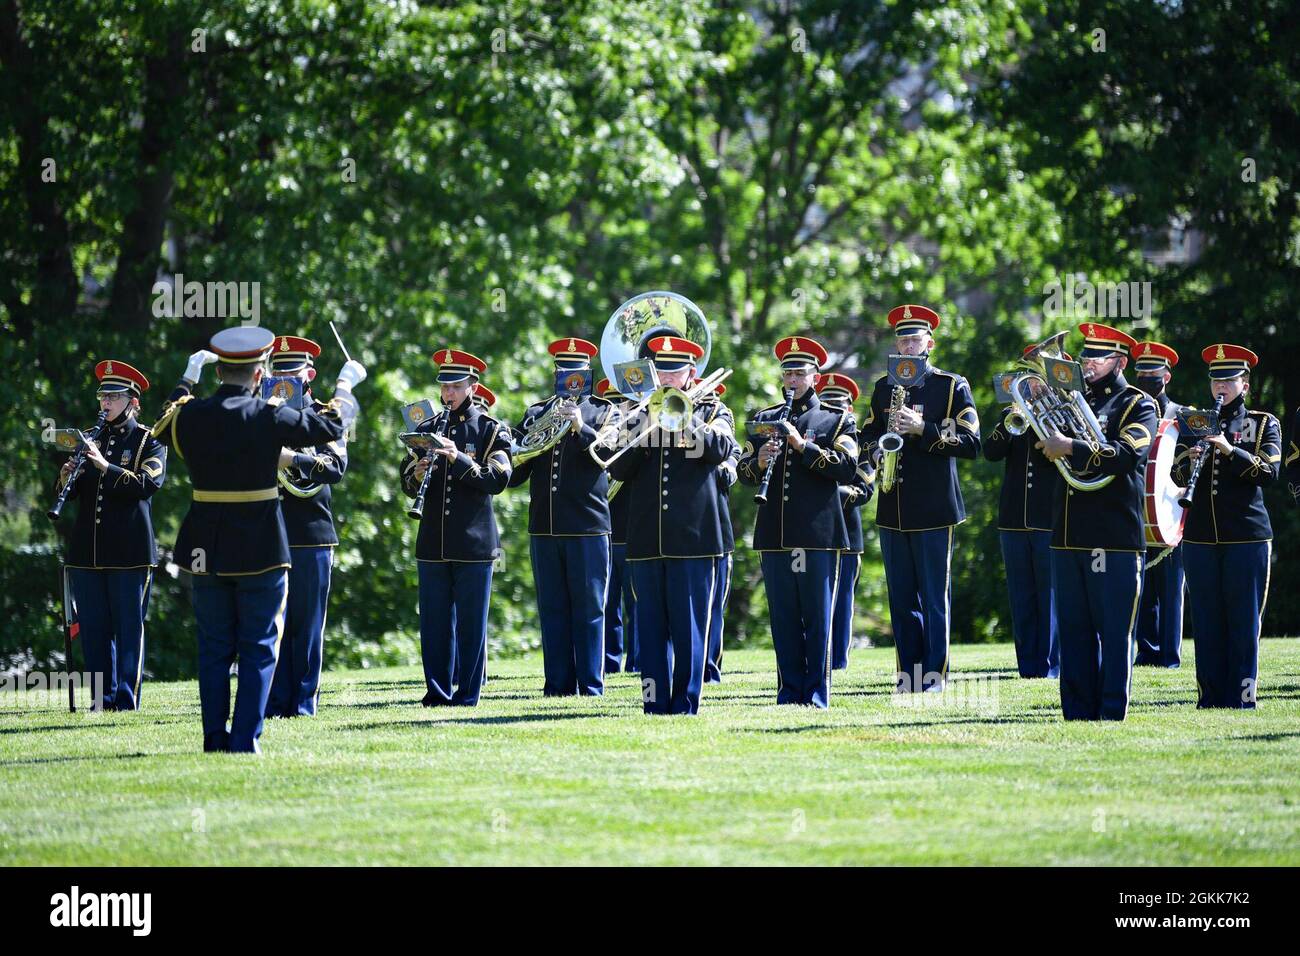 U.S. Soldiers assigned to the U.S. Army Band 'Pershing's Own' participate in an Army Full Honor Arrival Ceremony welcoming General Sir Mark Alexander Carleton-Smith, the chief of the General Staff of the British Army, at Whipple Field, Joint Base Myer-Henderson Hall, Arlington, Va., May 13, 2021. Chief of Staff of the U.S. Army Gen. James C. McConville hosted the event. Stock Photo